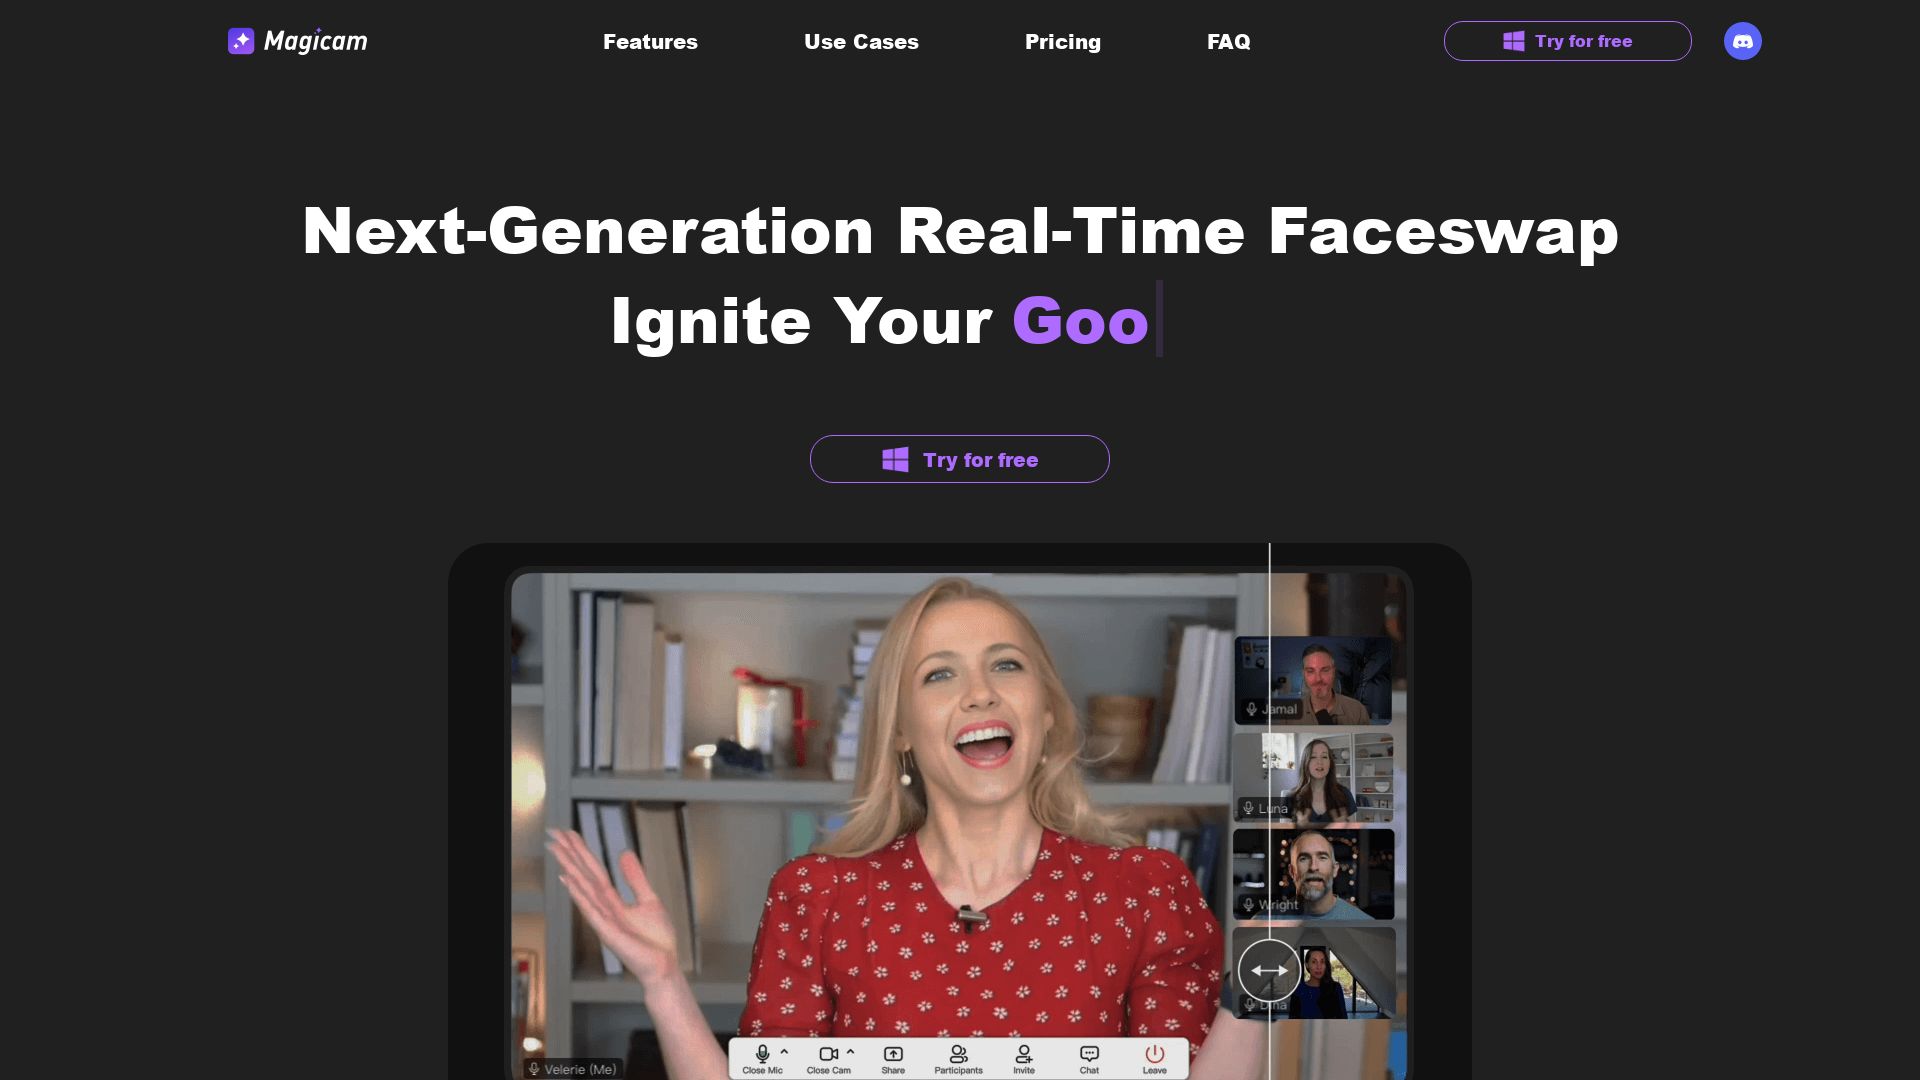 Magicam, The Ultimate Real-Time Face Swap Solution